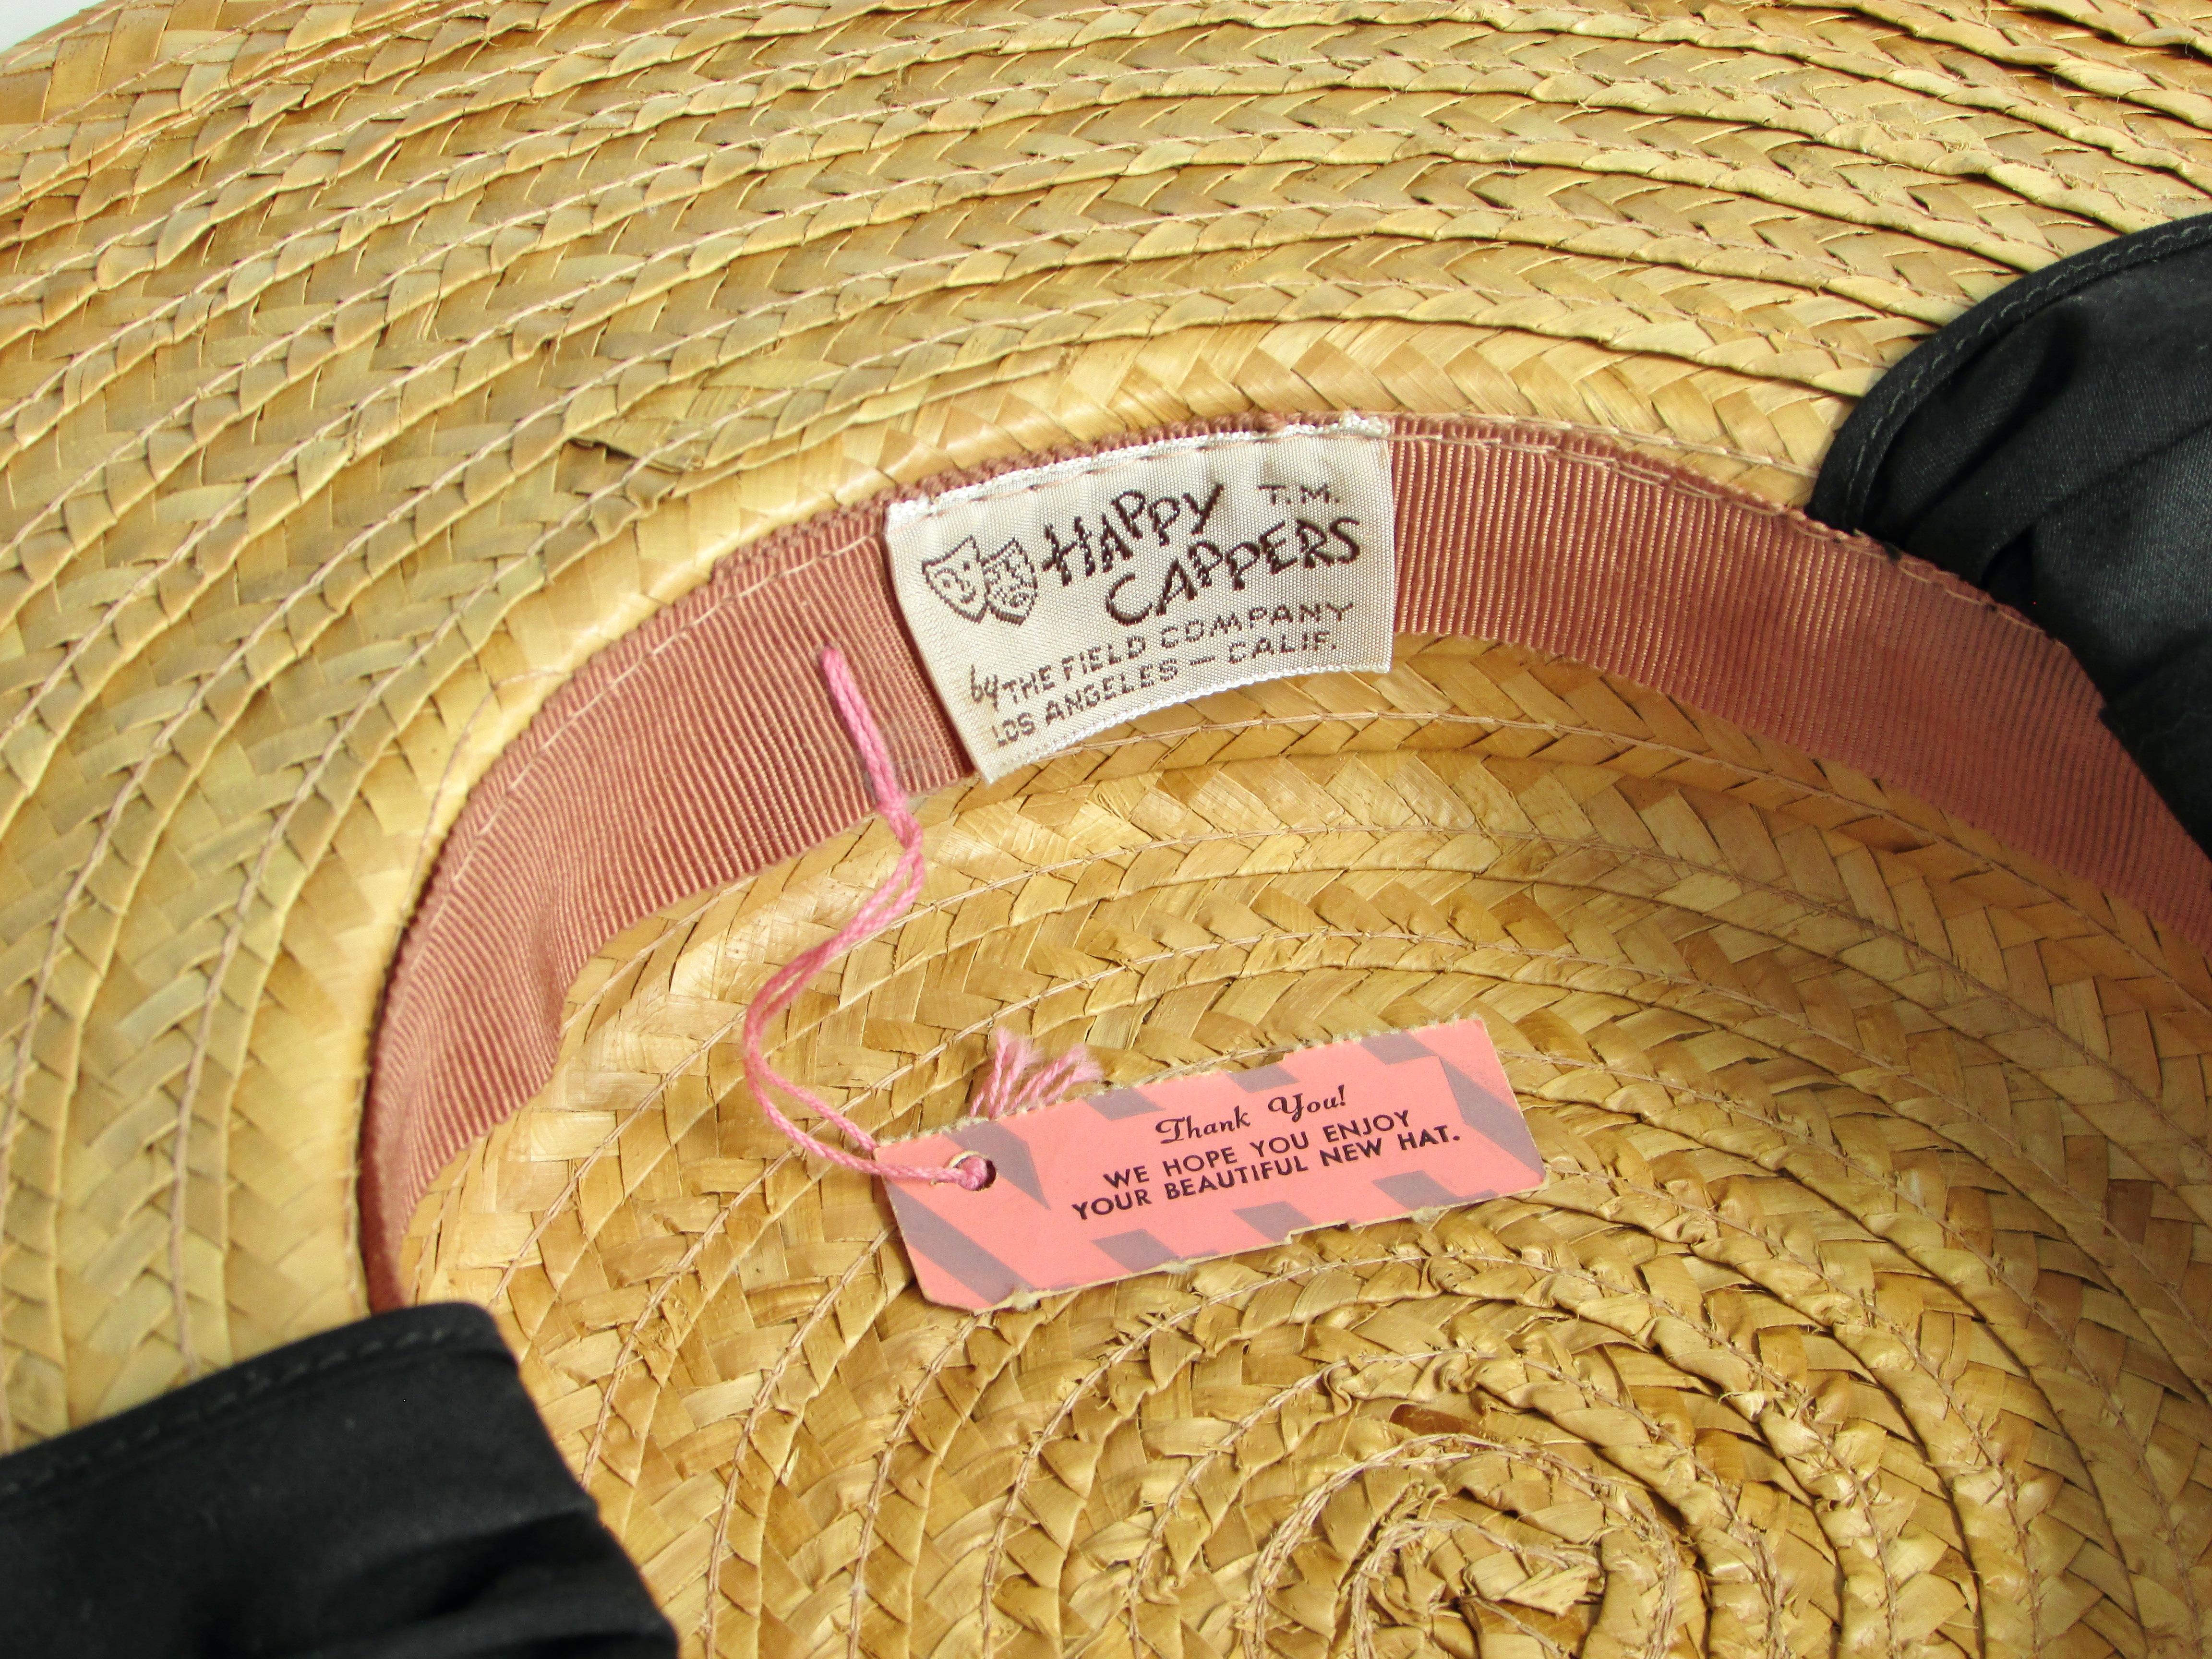 20th Century Ladies Happy Capper Straw Hat Field Co. Los Angeles Never Worn with String Tag For Sale